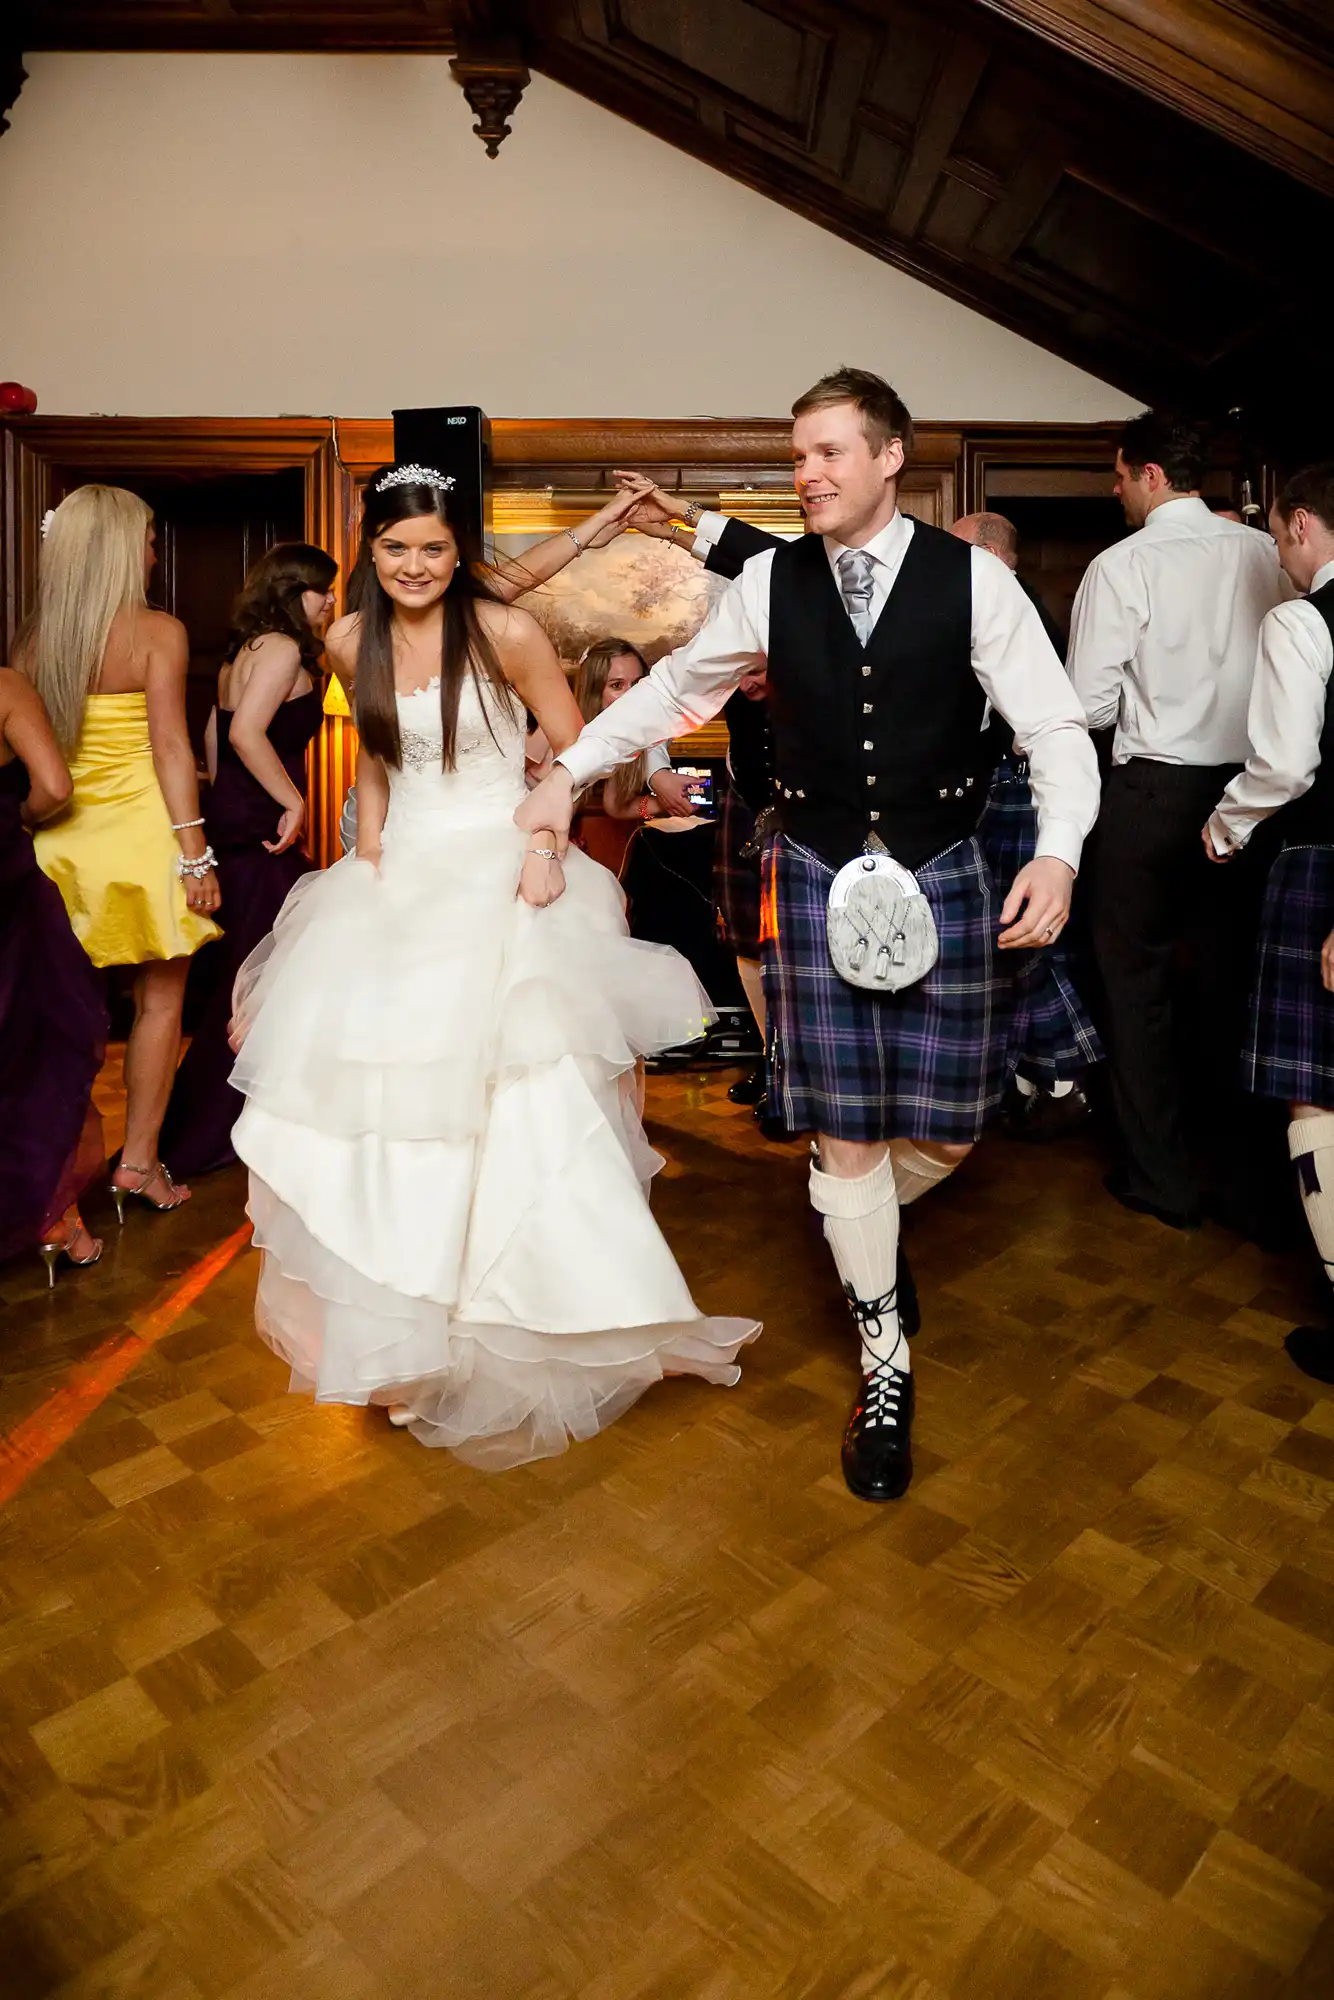 A bride in a white gown and a groom in a traditional scottish kilt and jacket dance joyfully at a wedding reception.